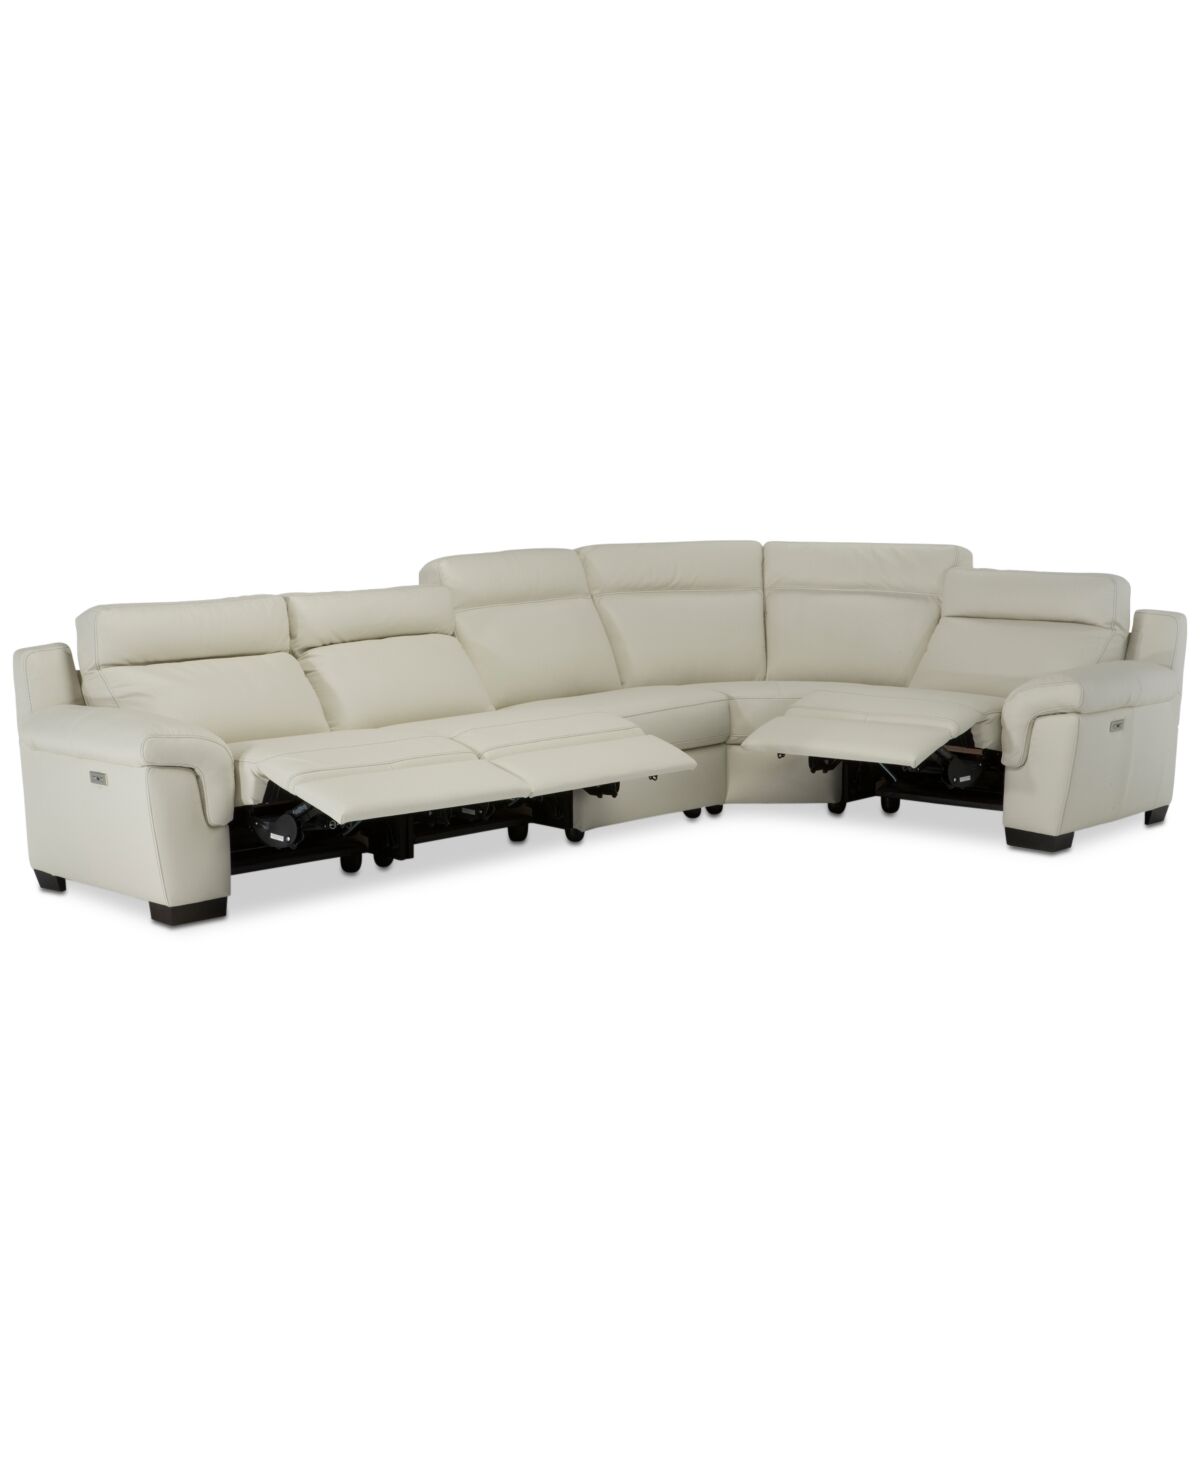 Furniture Julius Ii 5-Pc. Leather Sectional Sofa With 3 Power Recliners, Power Headrests & Usb Power Outlet, Created for Macy's - Off White